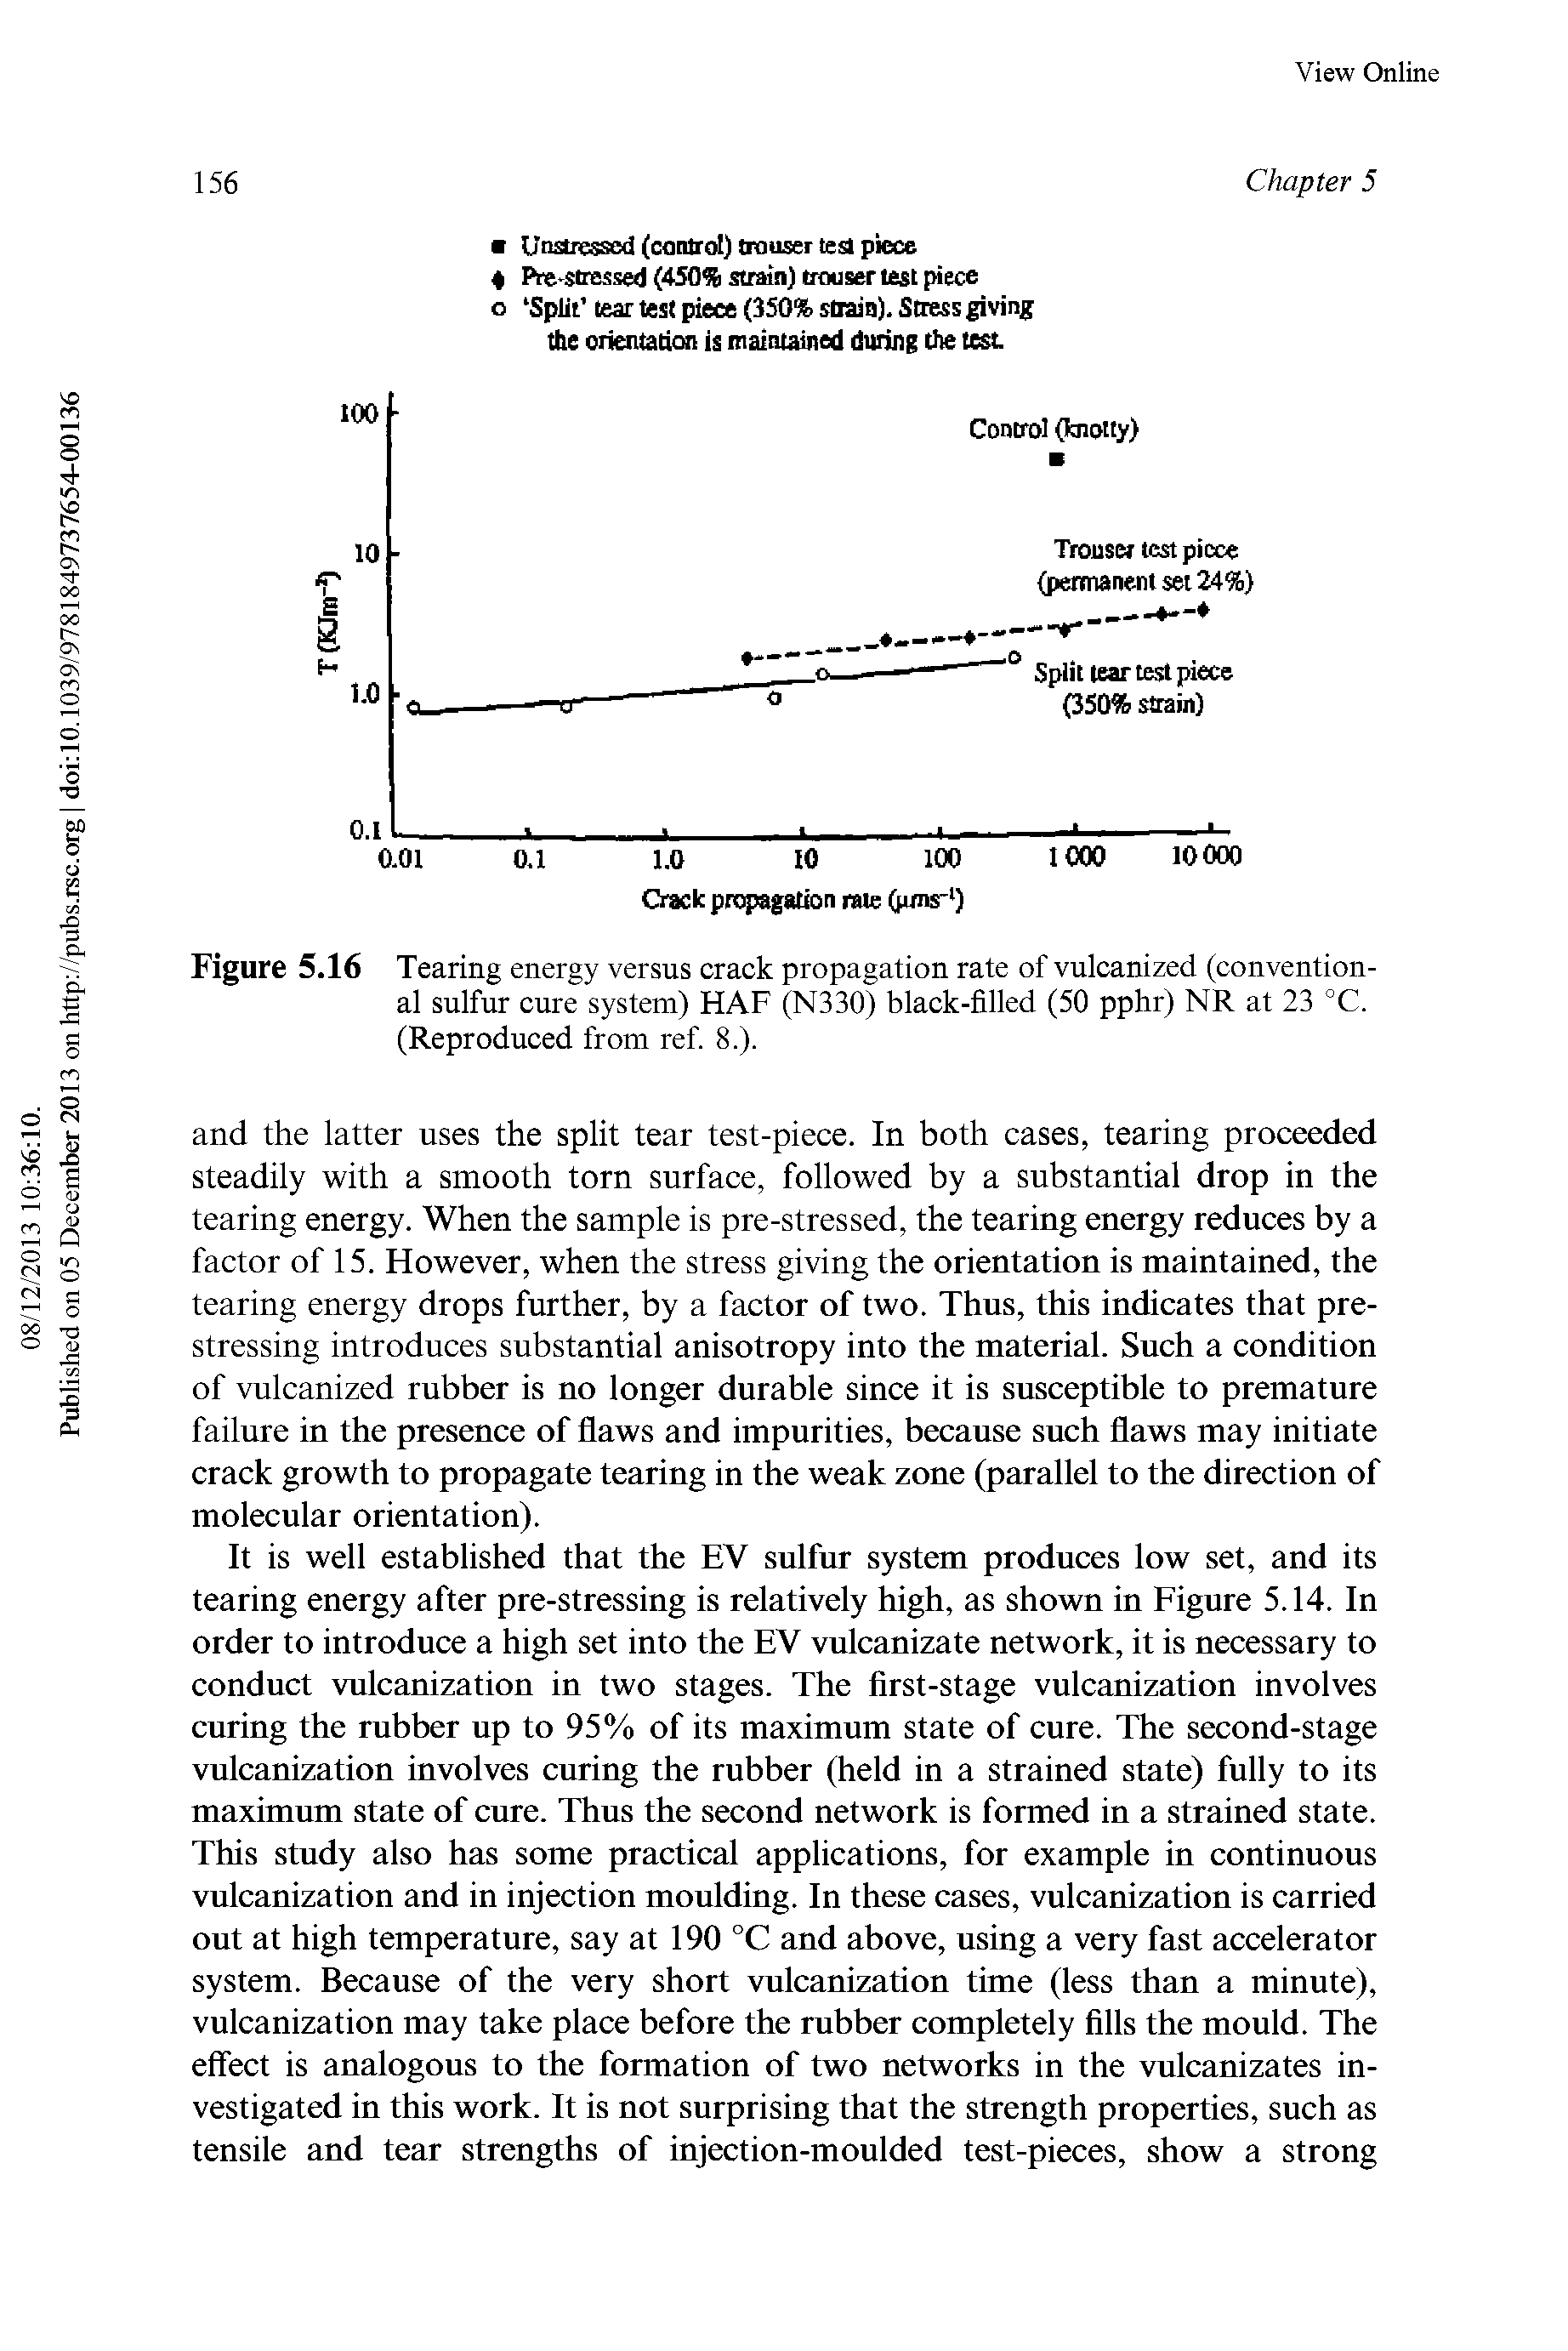 Figure 5.16 Tearing energy versus crack propagation rate of vulcanized (conventional sulfur cure system) HAF (N330) black-filled (50 pphr) NR at 23 °C. (Reproduced from ref 8.).